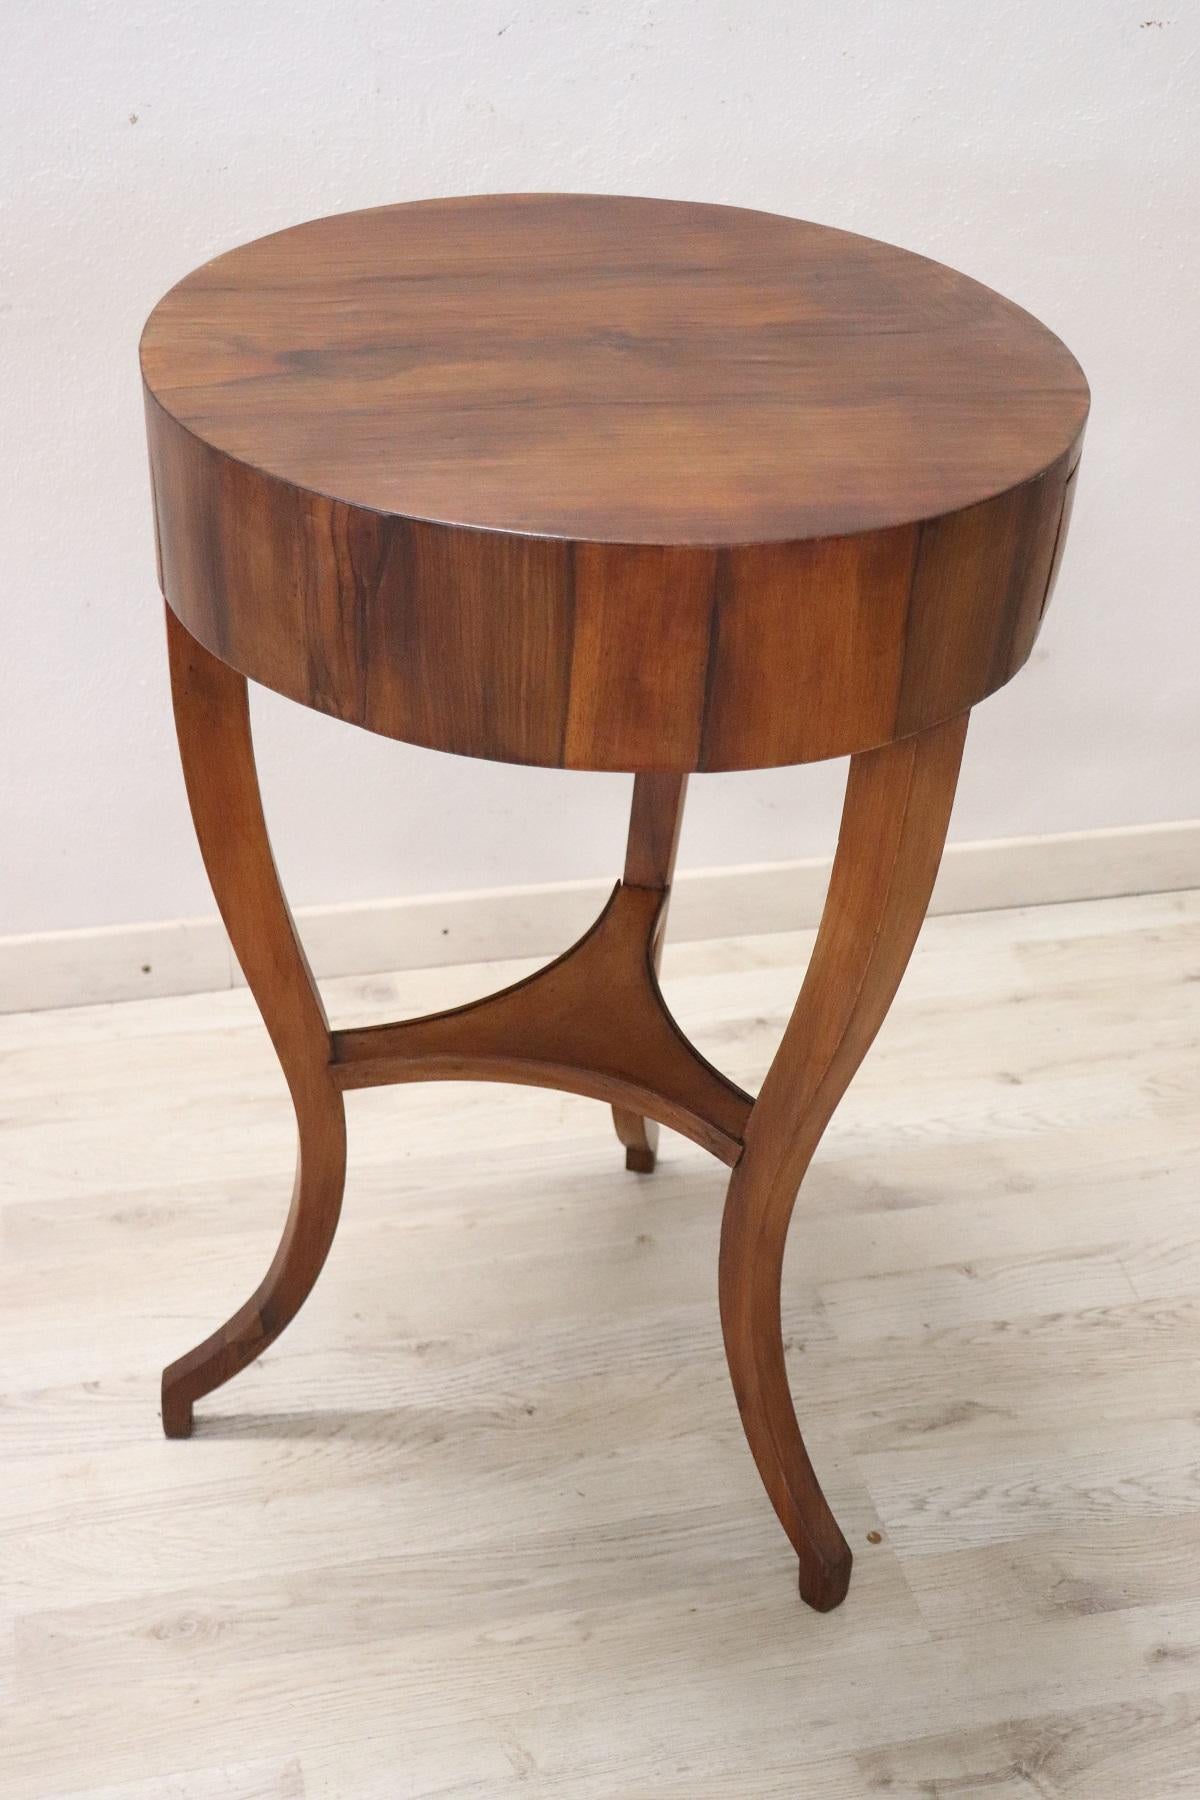 Late 18th Century 18th Century Italian Directoire Walnut Round Side Table or Pedestal Table